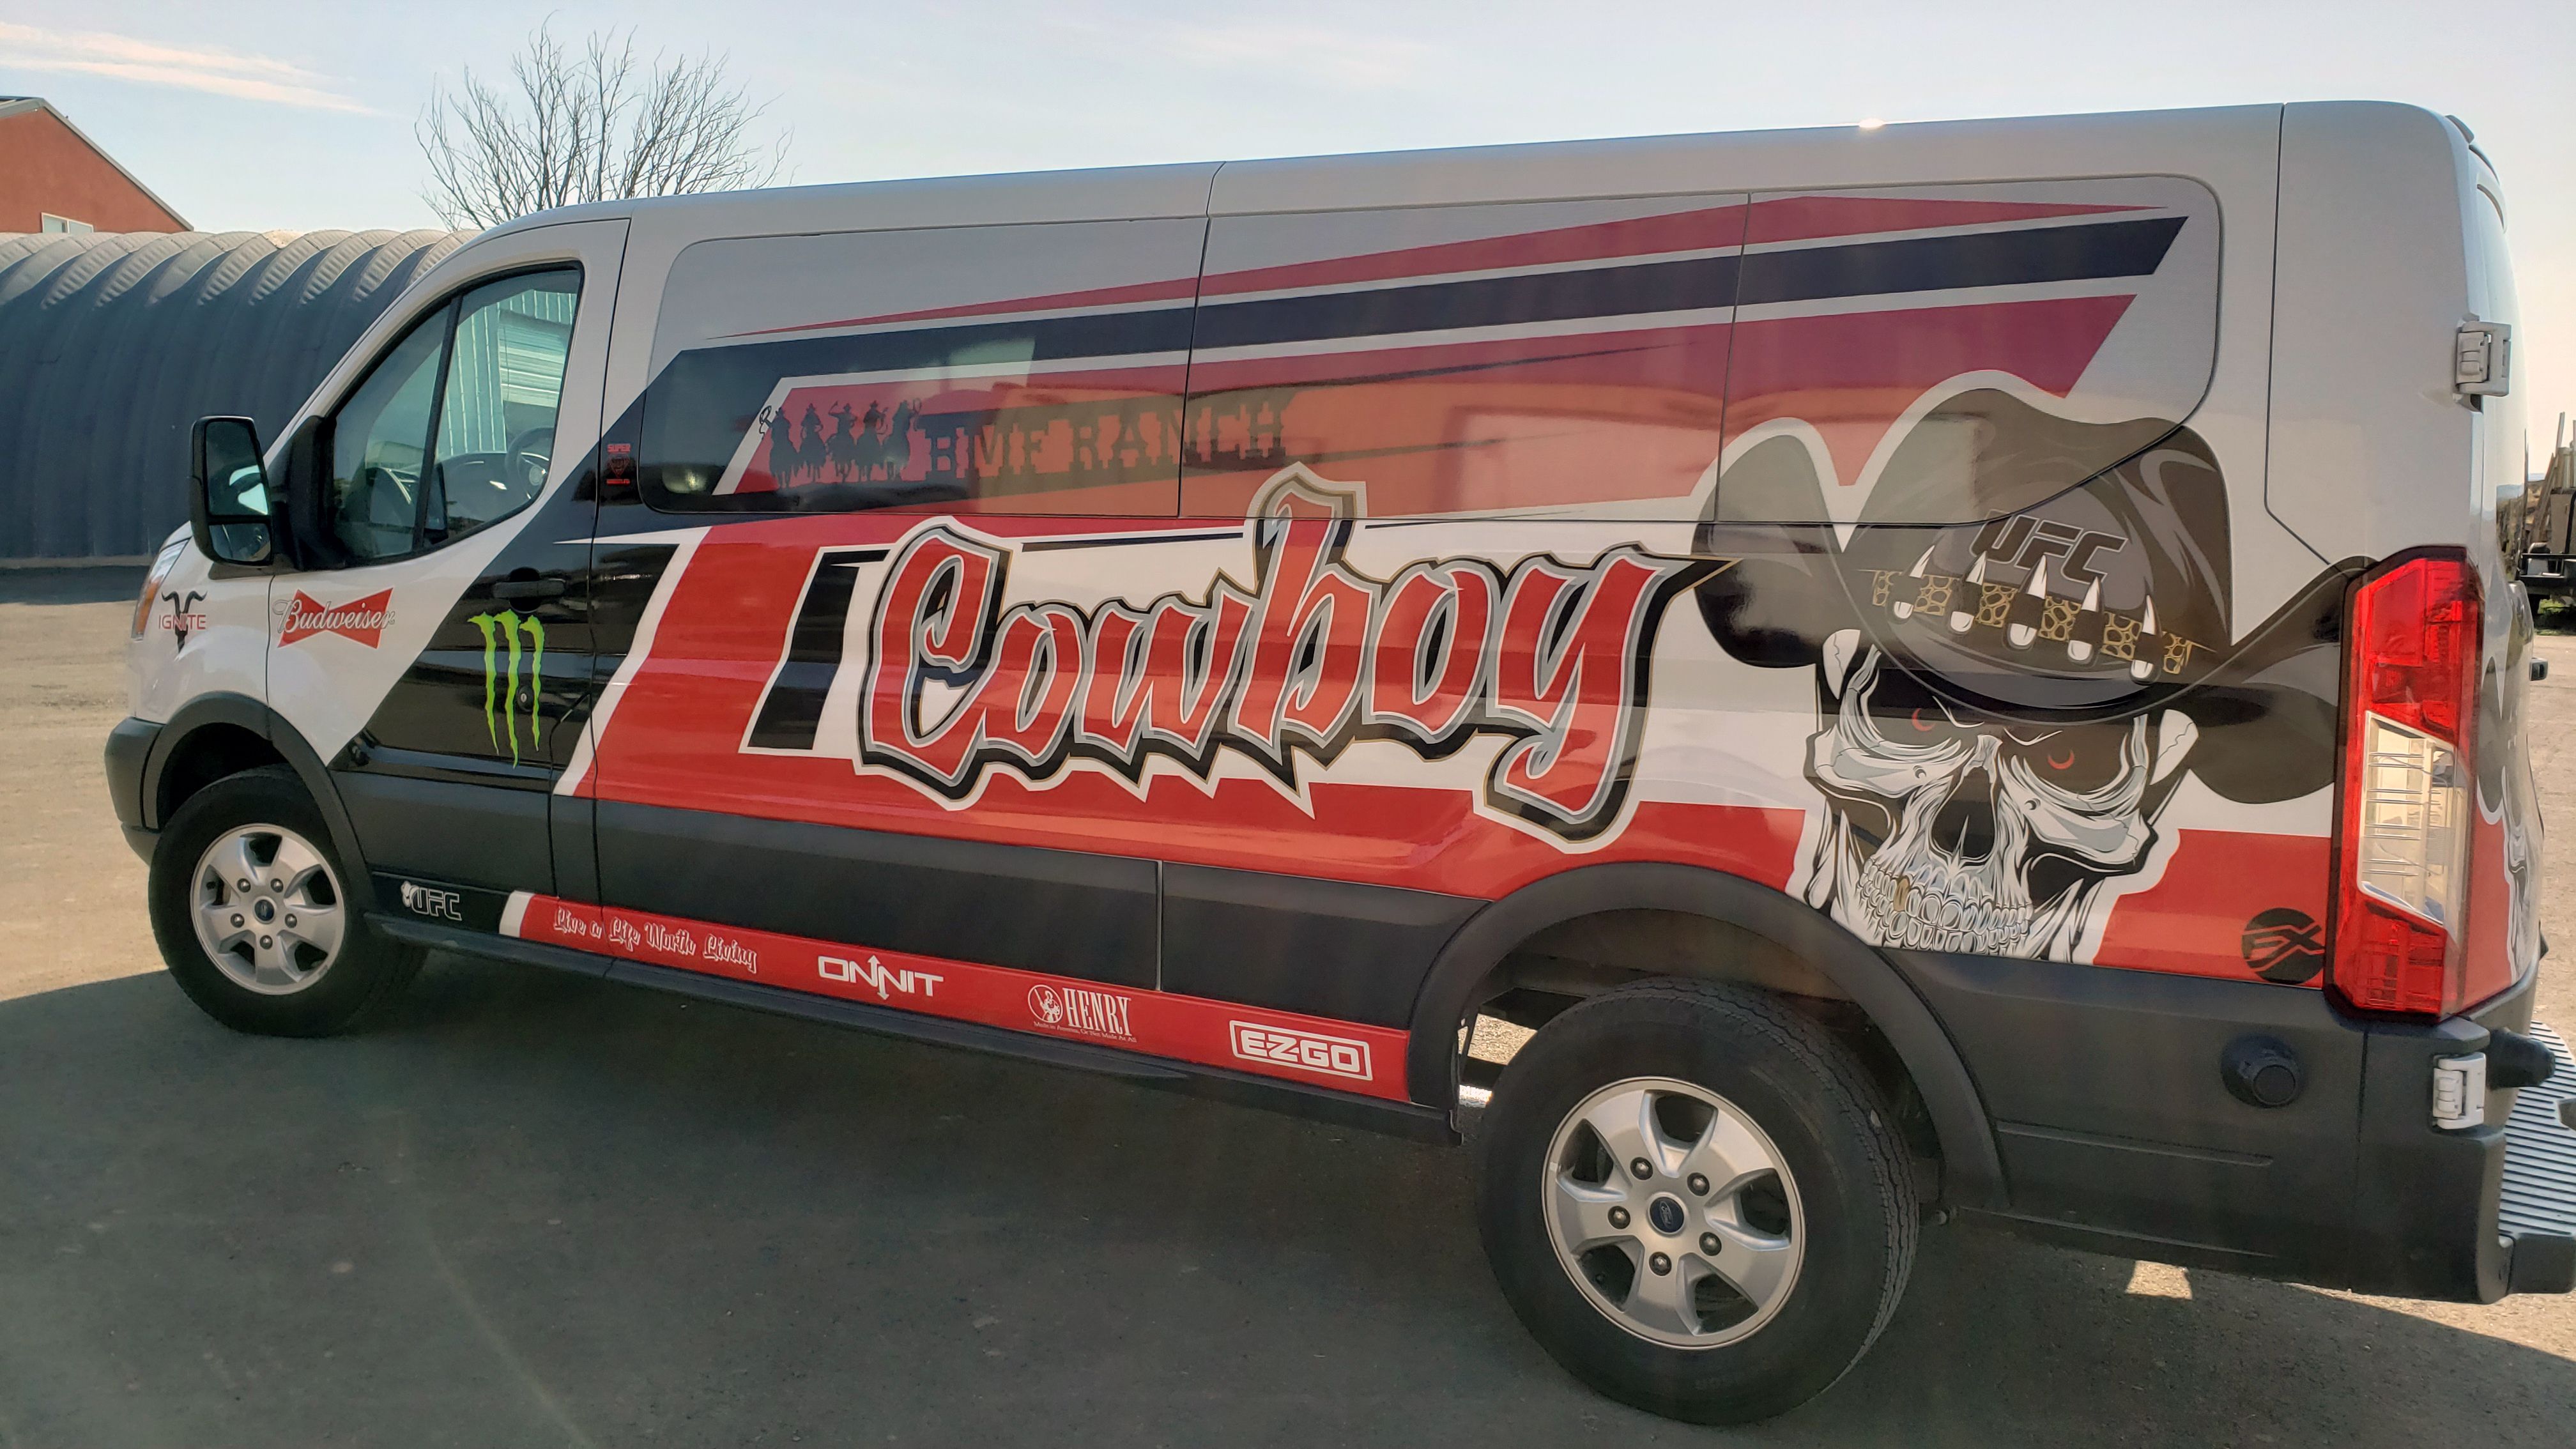 A commercial work van with a custom vinyl wrap with white, red, and black logos and text with a cowboy UFC design